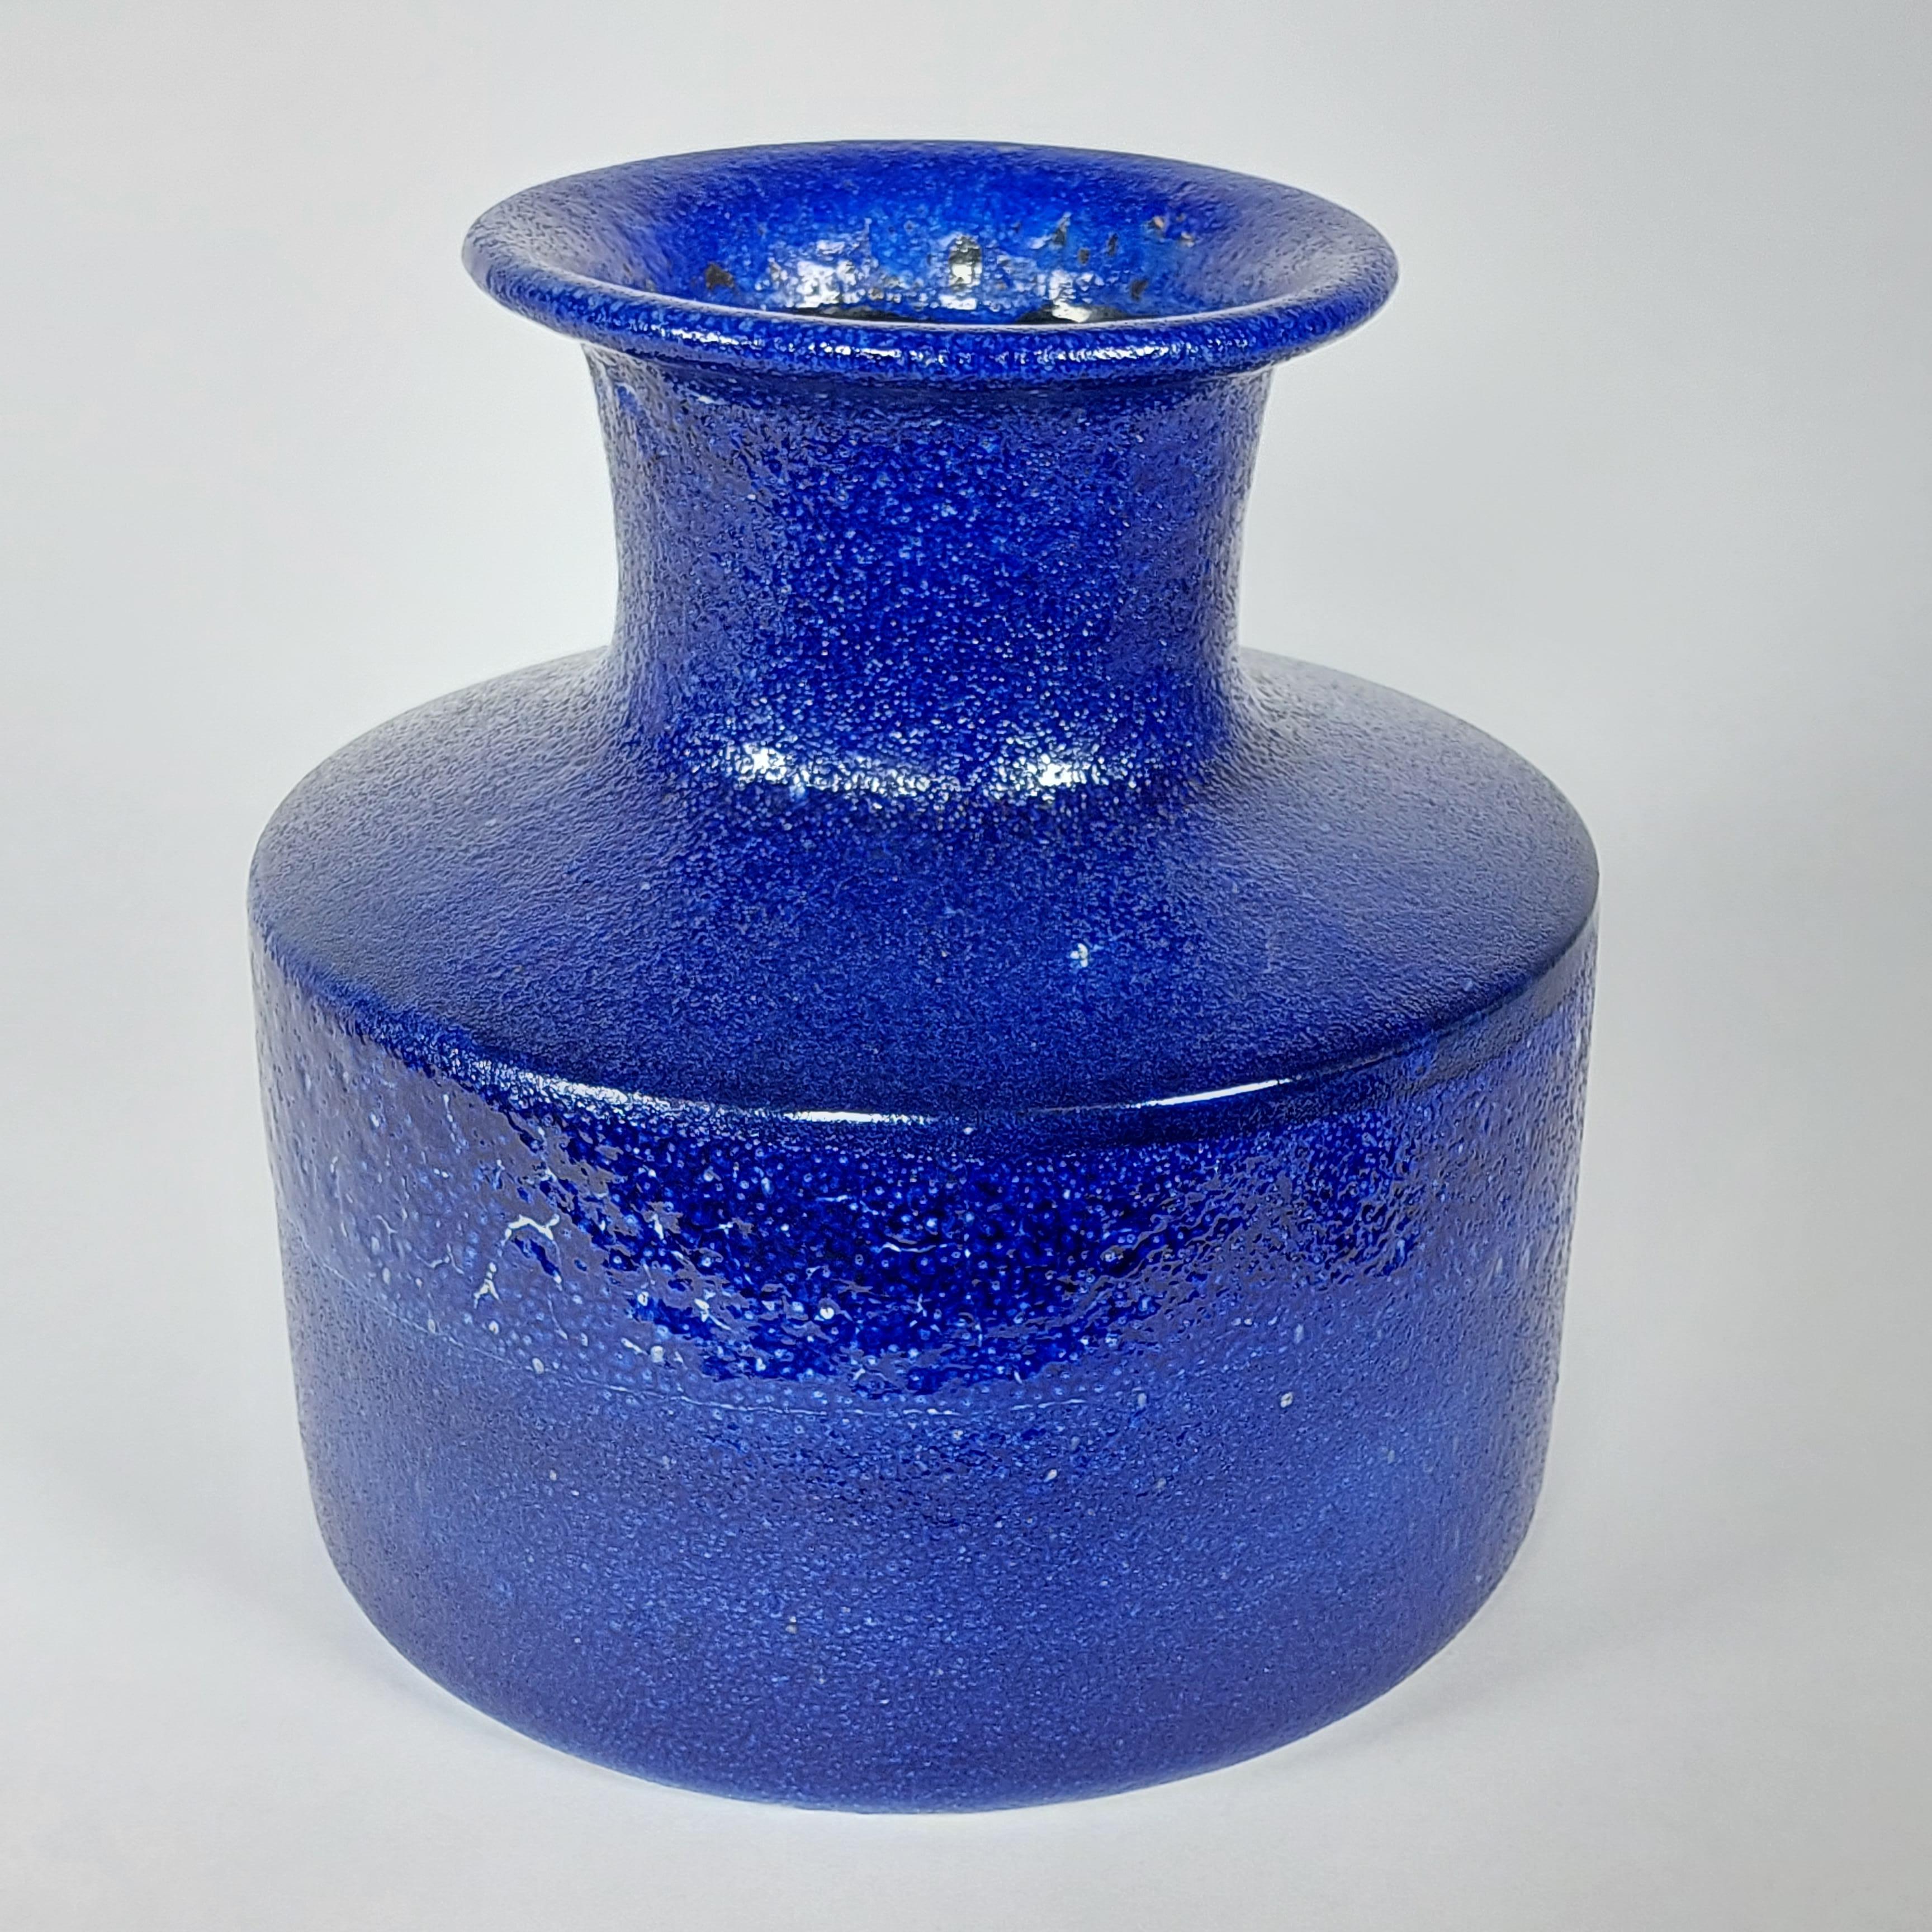 Vibrant blue vase by Swiss artist and potter André Freymond. Mid-sized piece from the late 1950s to early 1960s. Freymond's pieces are often unique, the artists penchant for rarely making two pieces alike, preferring to experiment and develop his